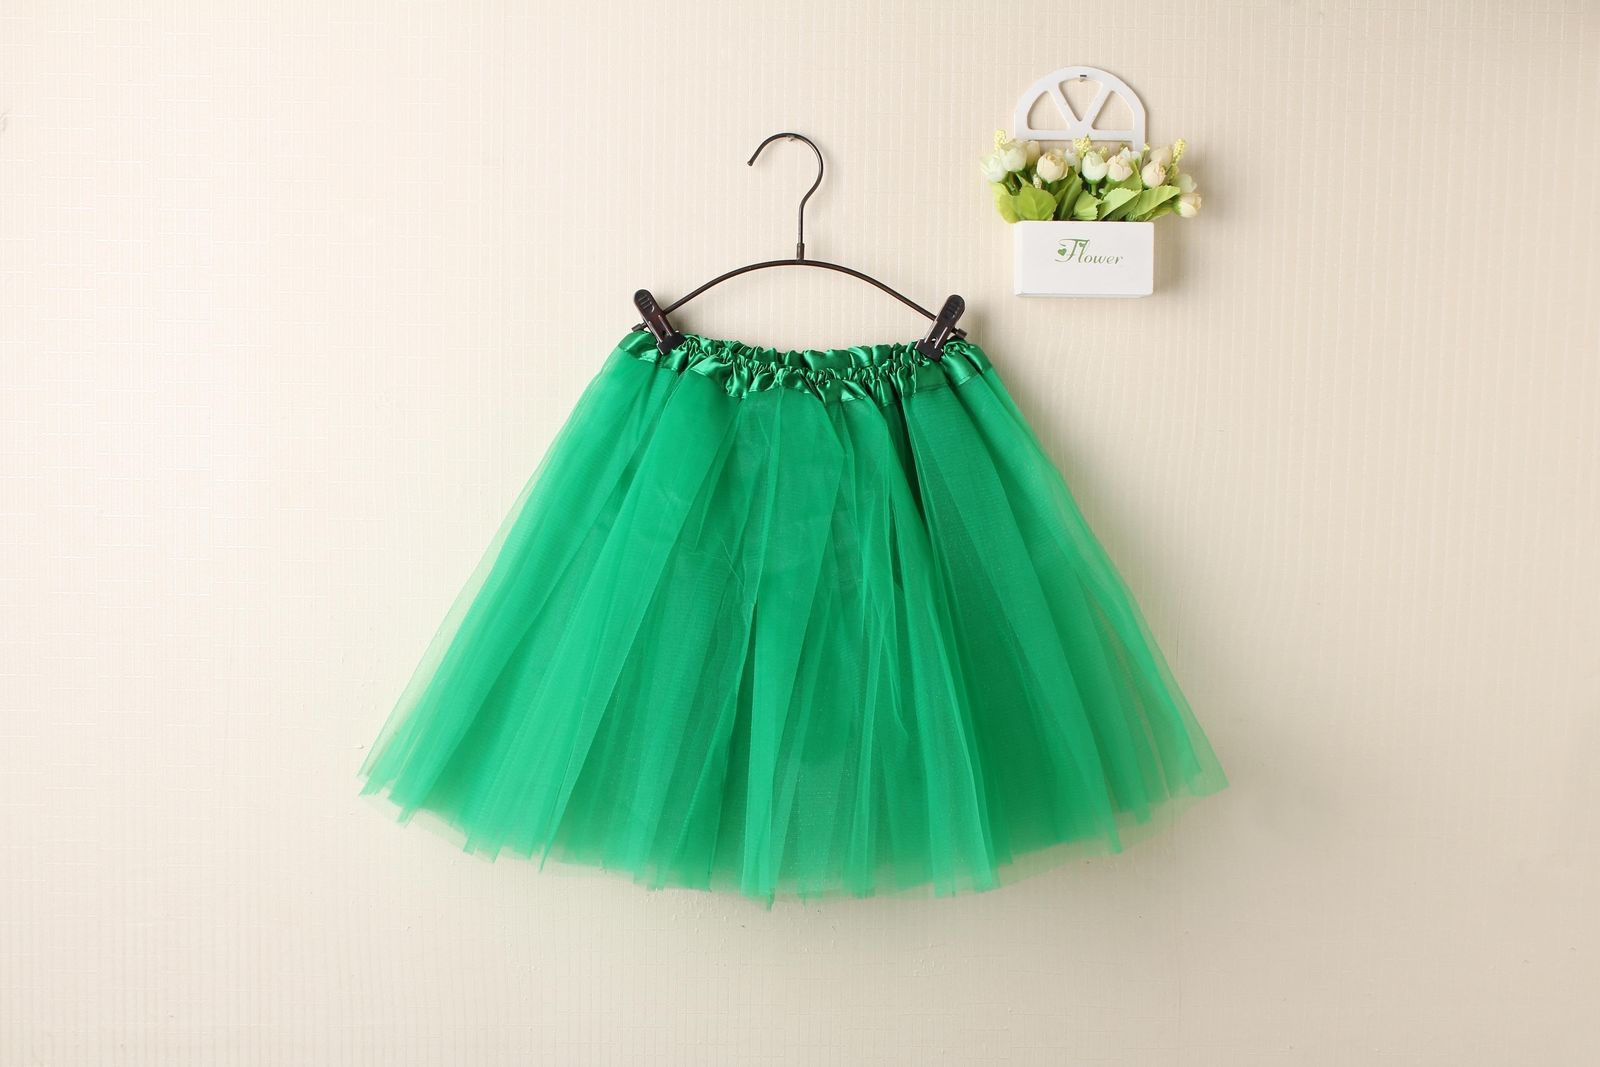 New Adults Tulle Tutu Skirt Dressup Party Costume Ballet Womens Girls Dance Wear, Green, Adults